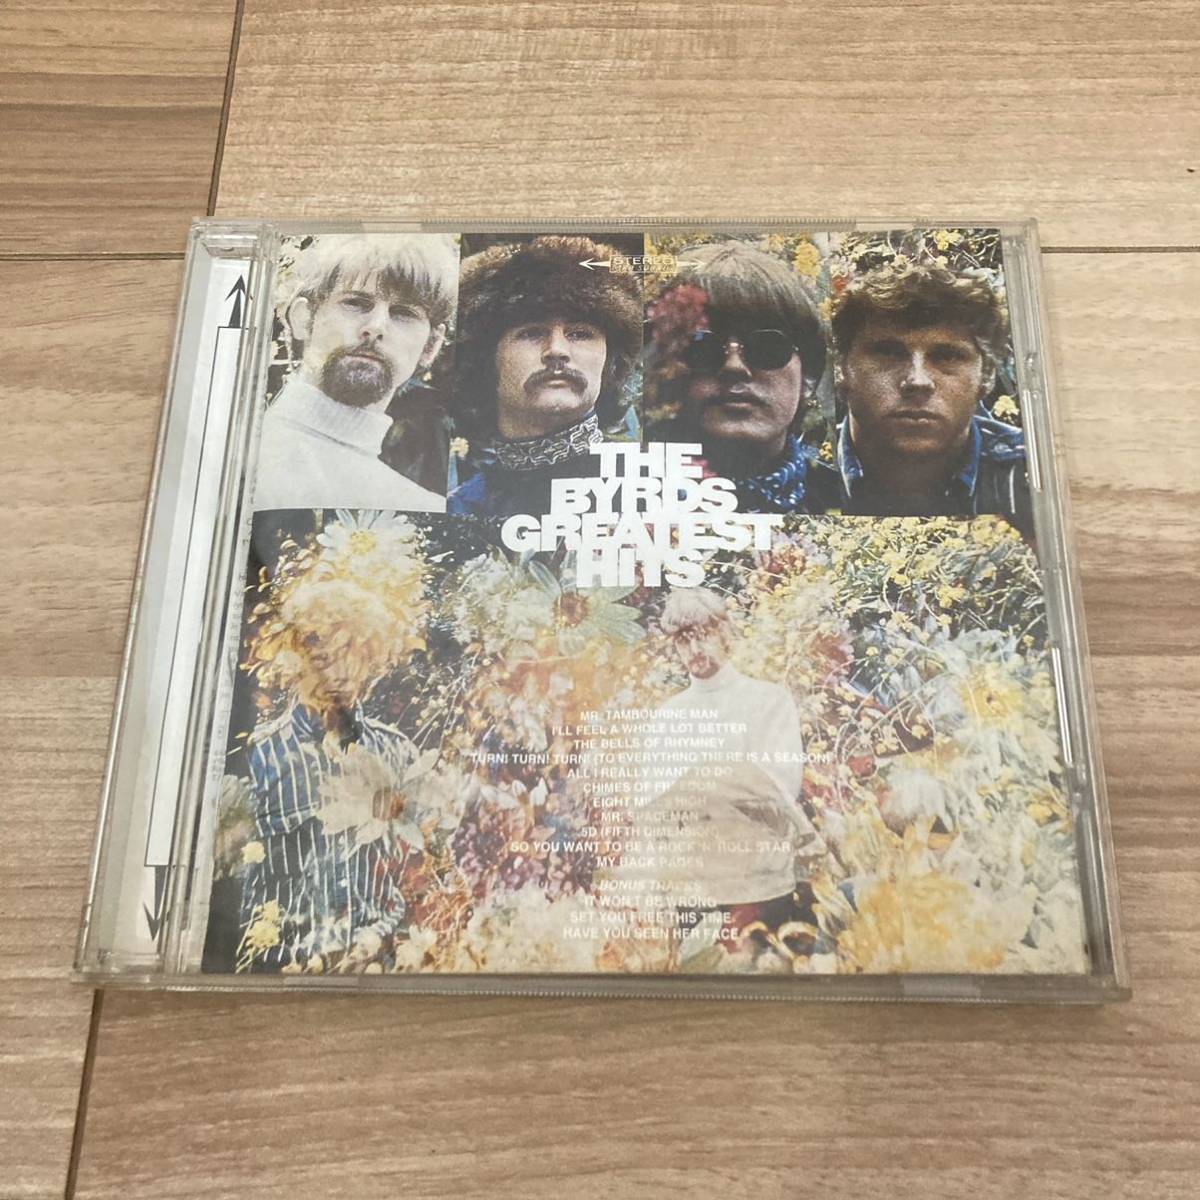 THE BYRDS ザ・バーズ GREATEST HITS CD 輸入盤 ベスト_画像1